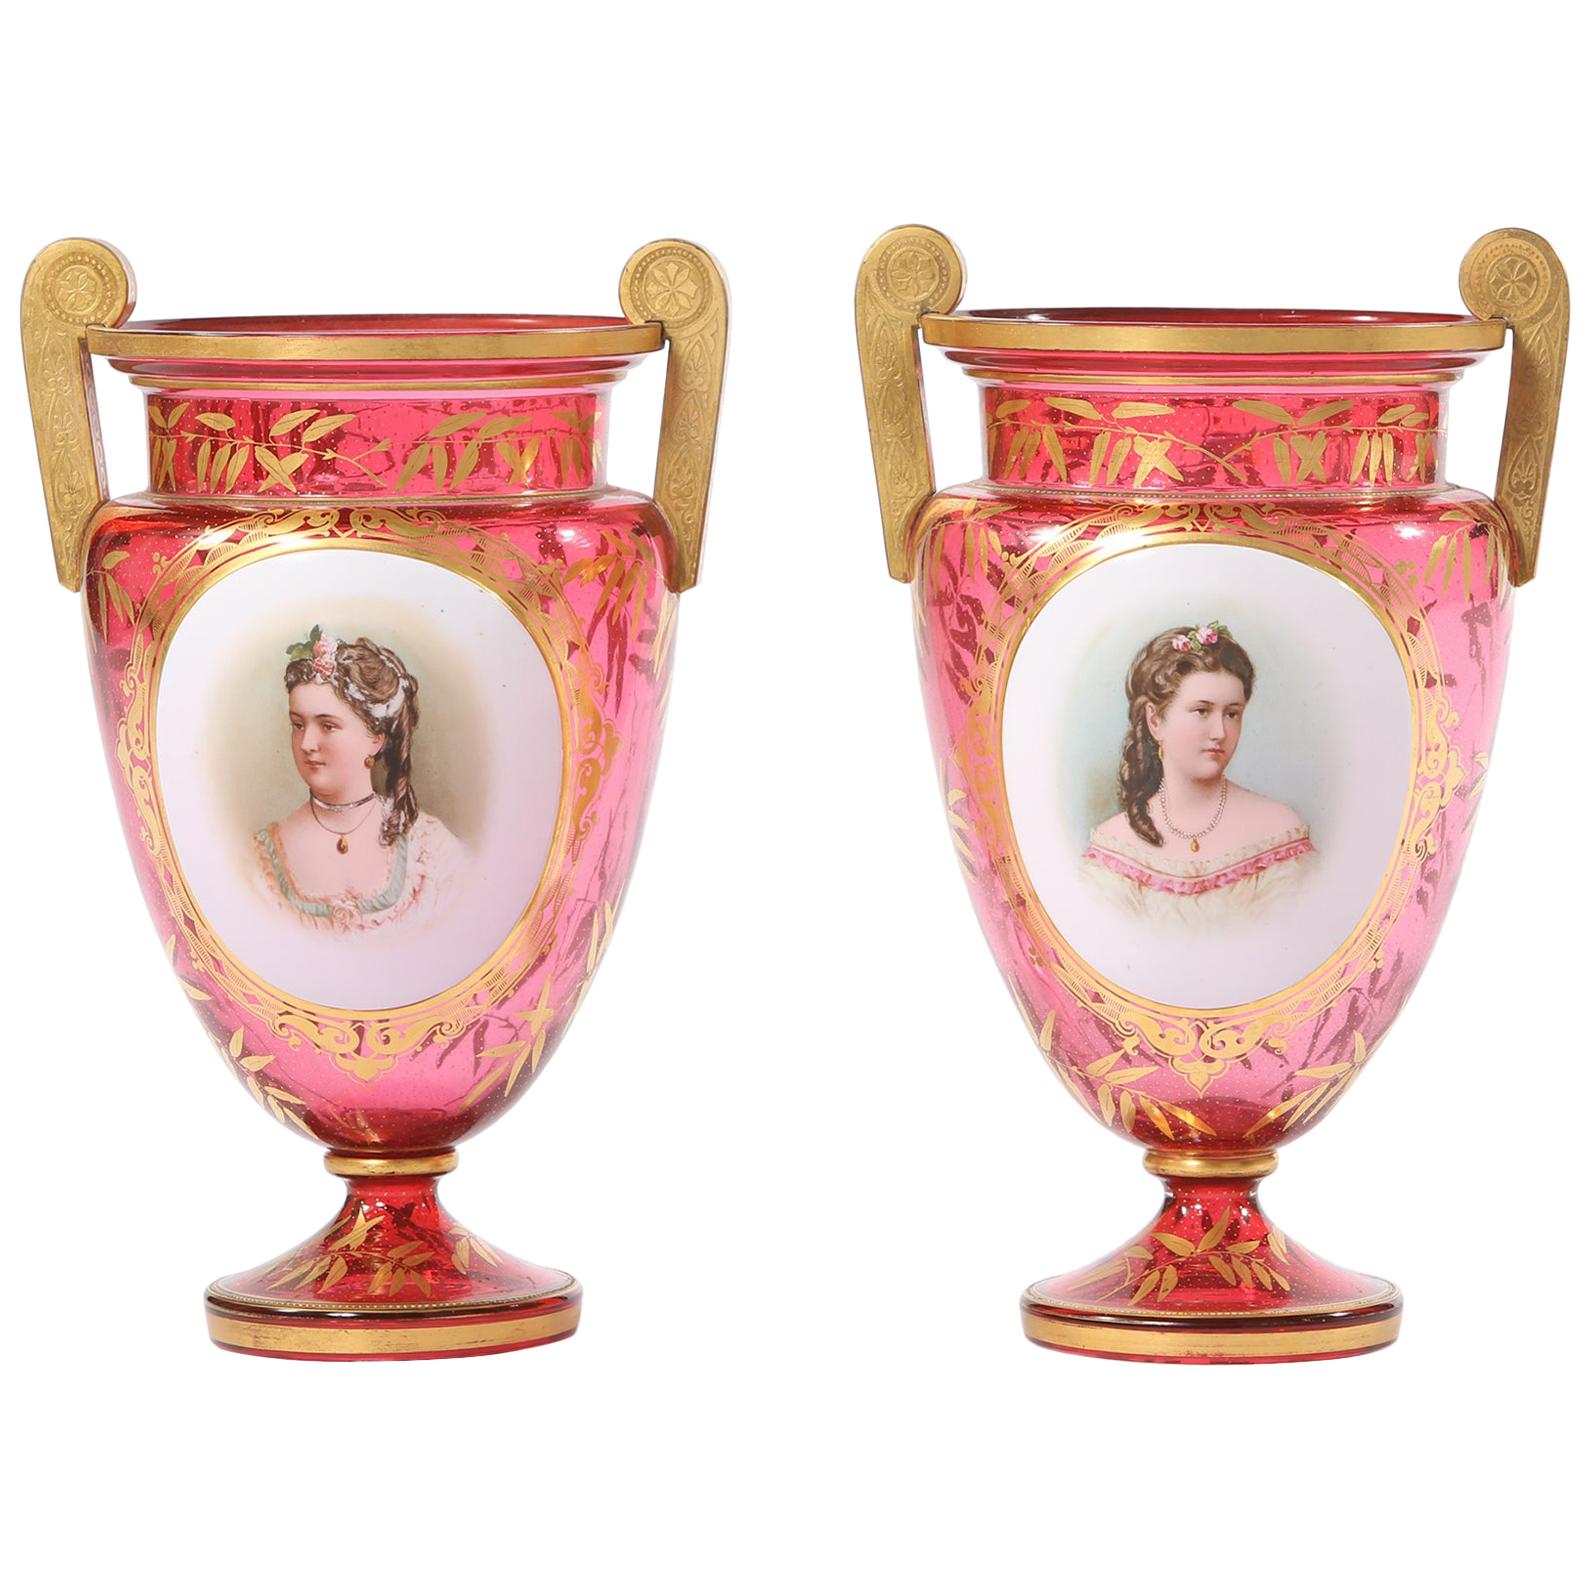 Early 19th Century Gilt Glass Pair of Vases or Urns For Sale